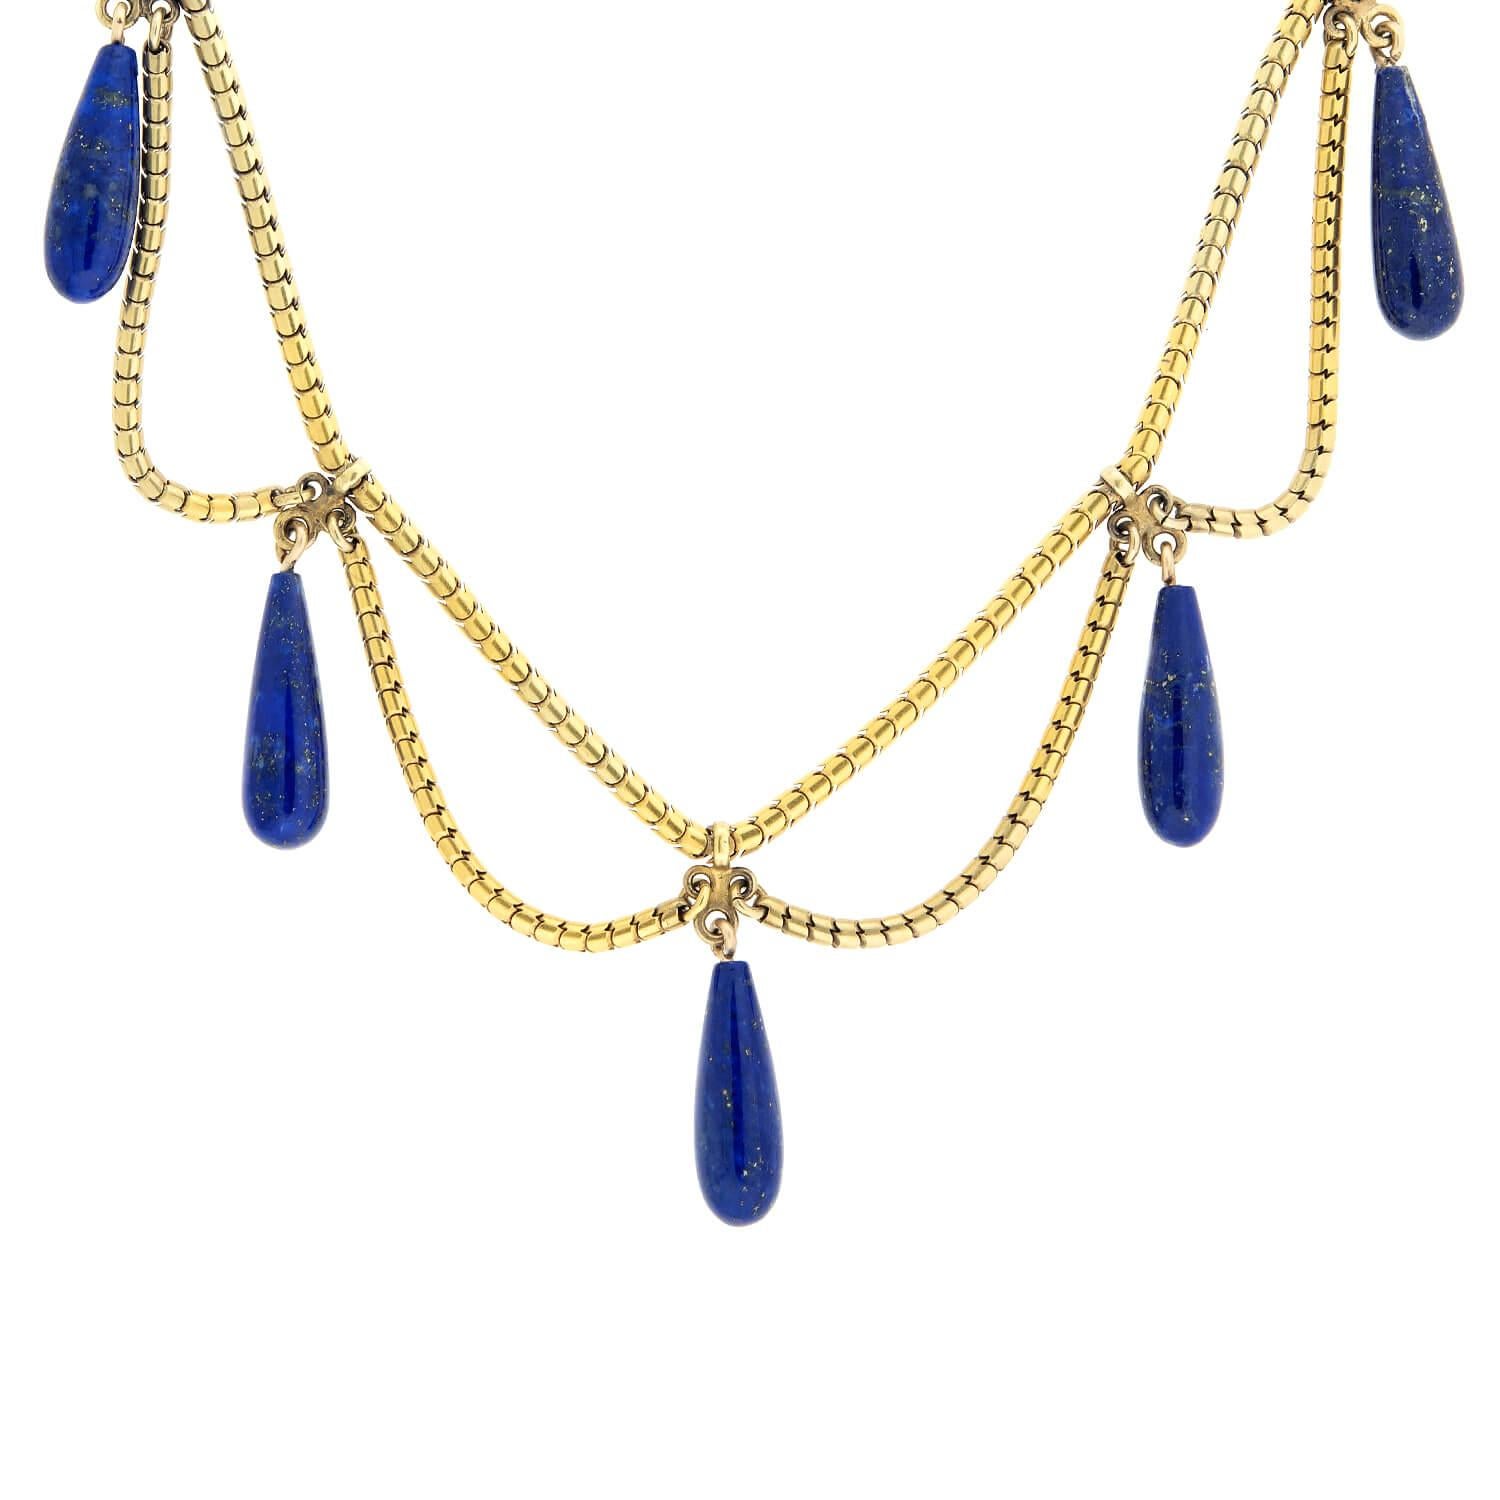 A lovely necklace from the Victorian (ca1880s) era! Crafted in 18k yellow gold, this classically designed necklace features five beautiful dark blue and brown speckled lapis lazuli teardrop dangles. The necklace is composed of a snake chain riveted